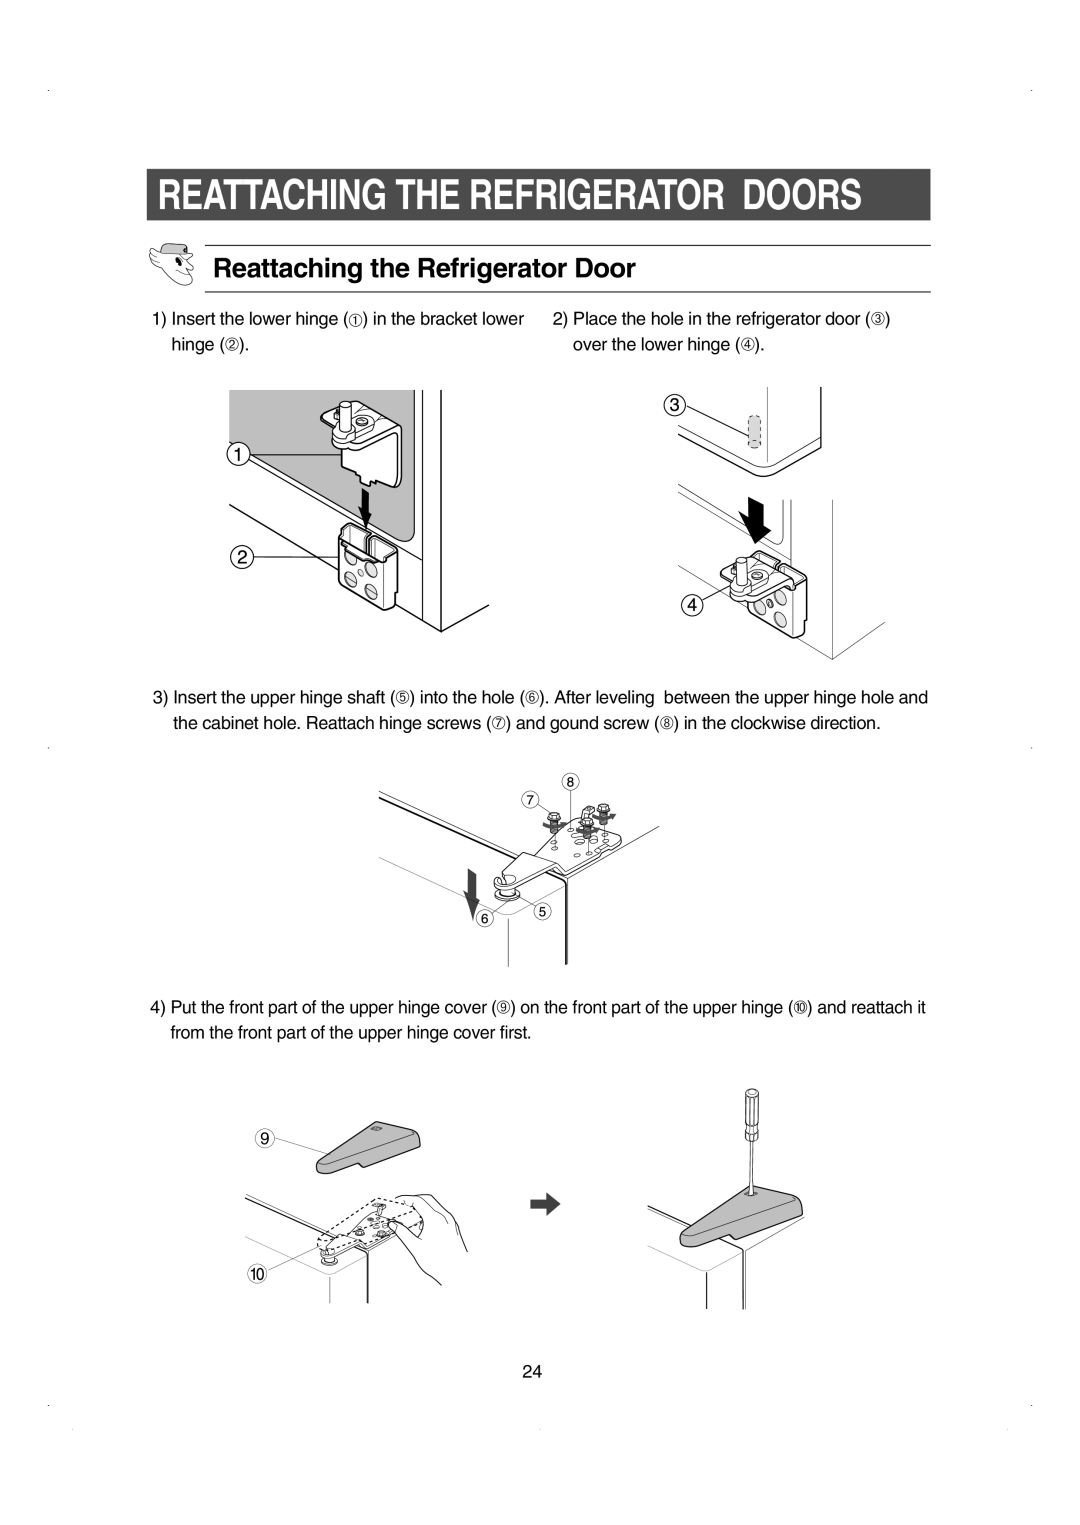 Samsung RS26WUNS installation instructions Reattaching the Refrigerator Door, Reattaching The Refrigerator Doors 